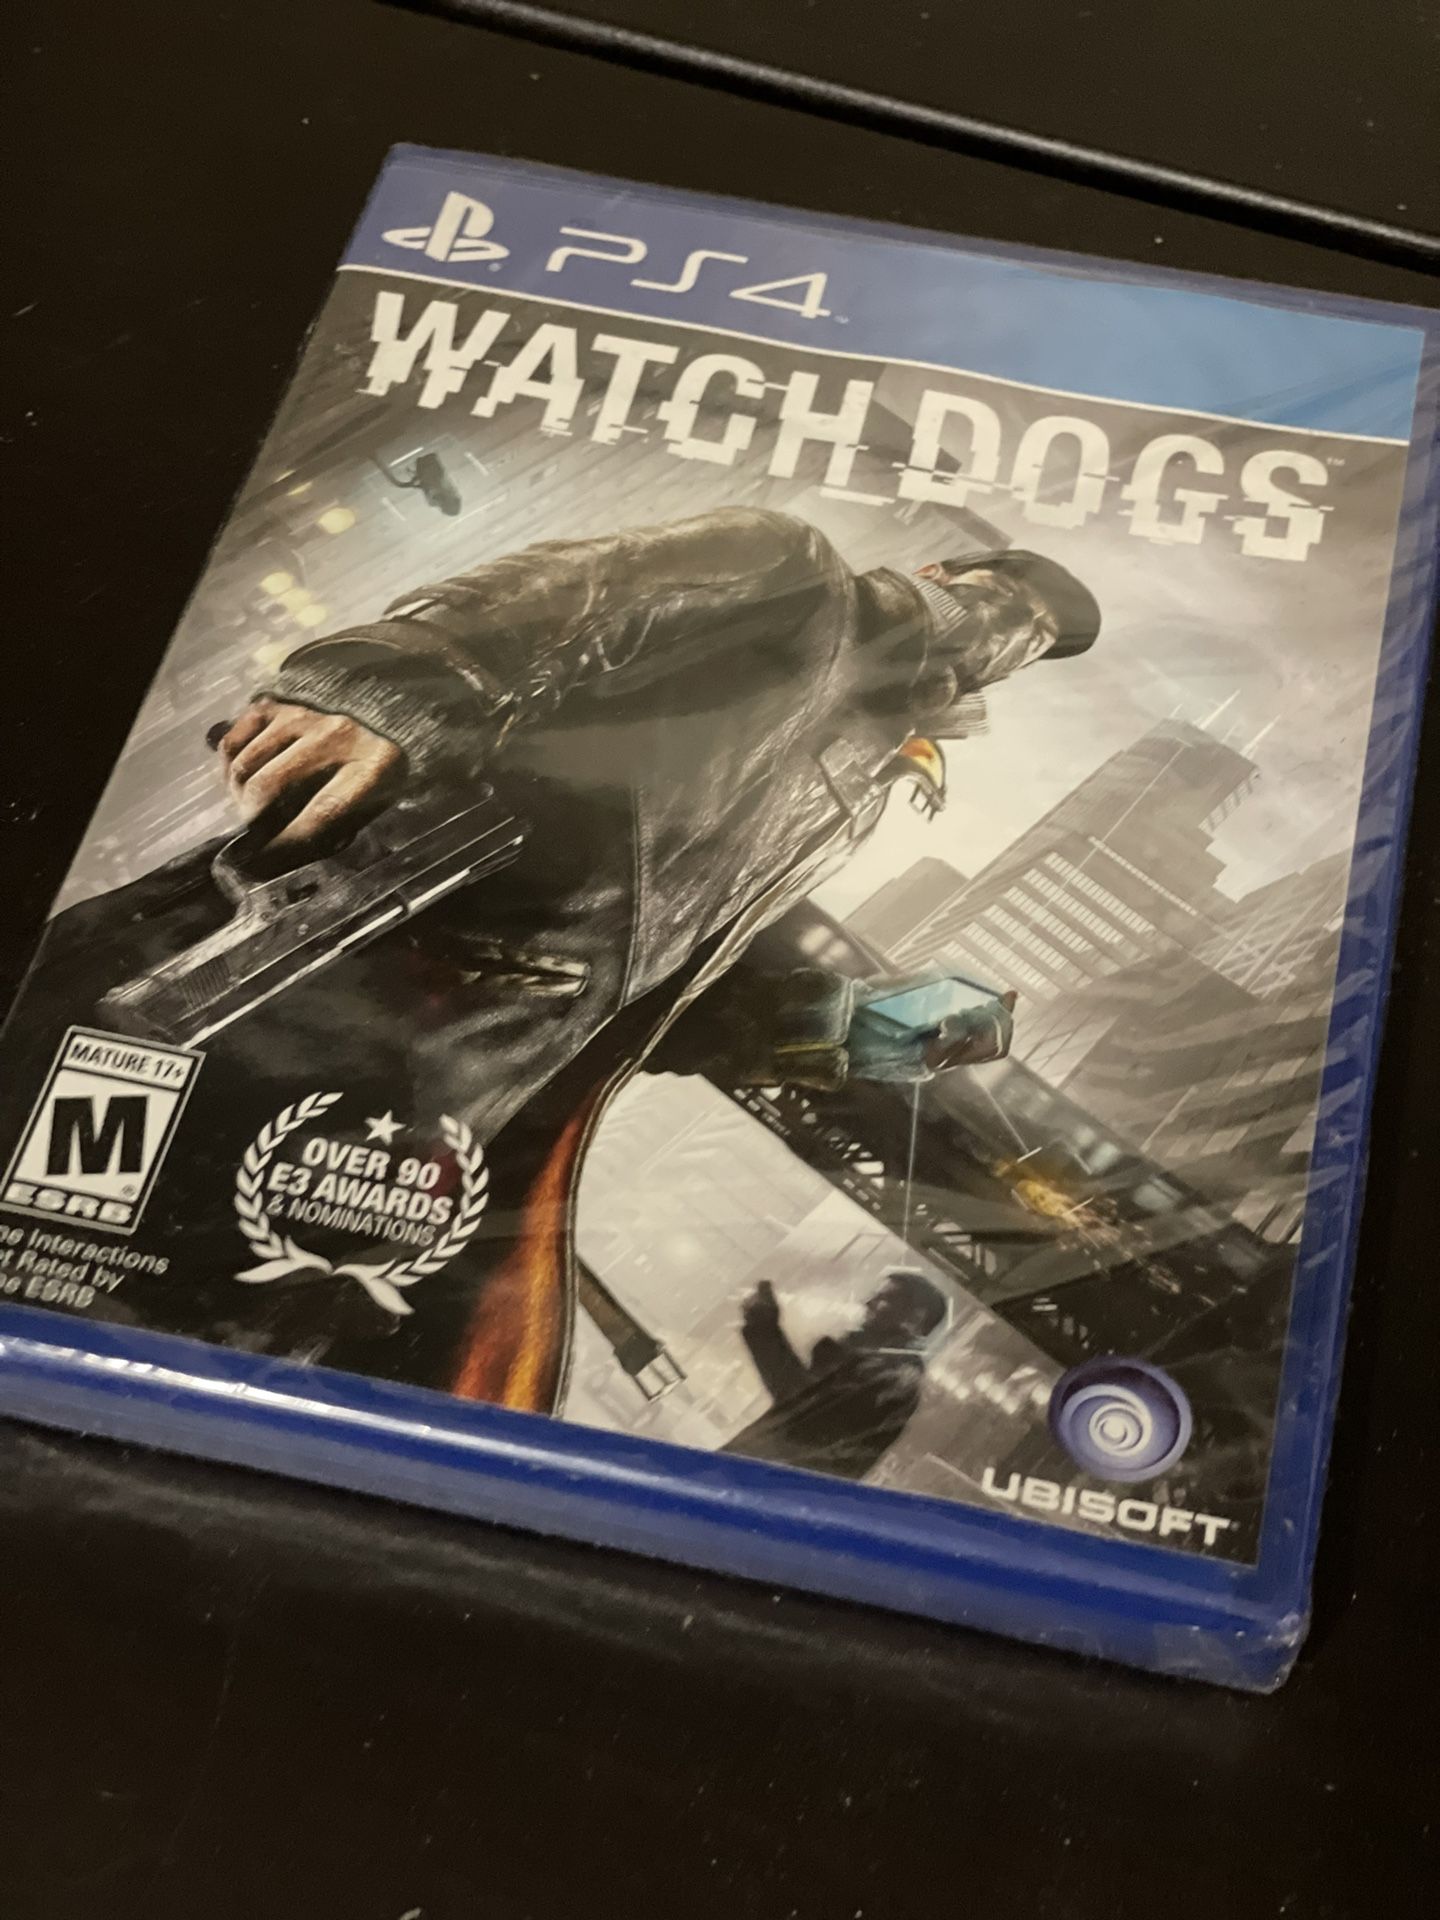 Watch Dogs Watchdogs Sony PlayStation 4 PS4 Video Game BRAND NEW SEALED